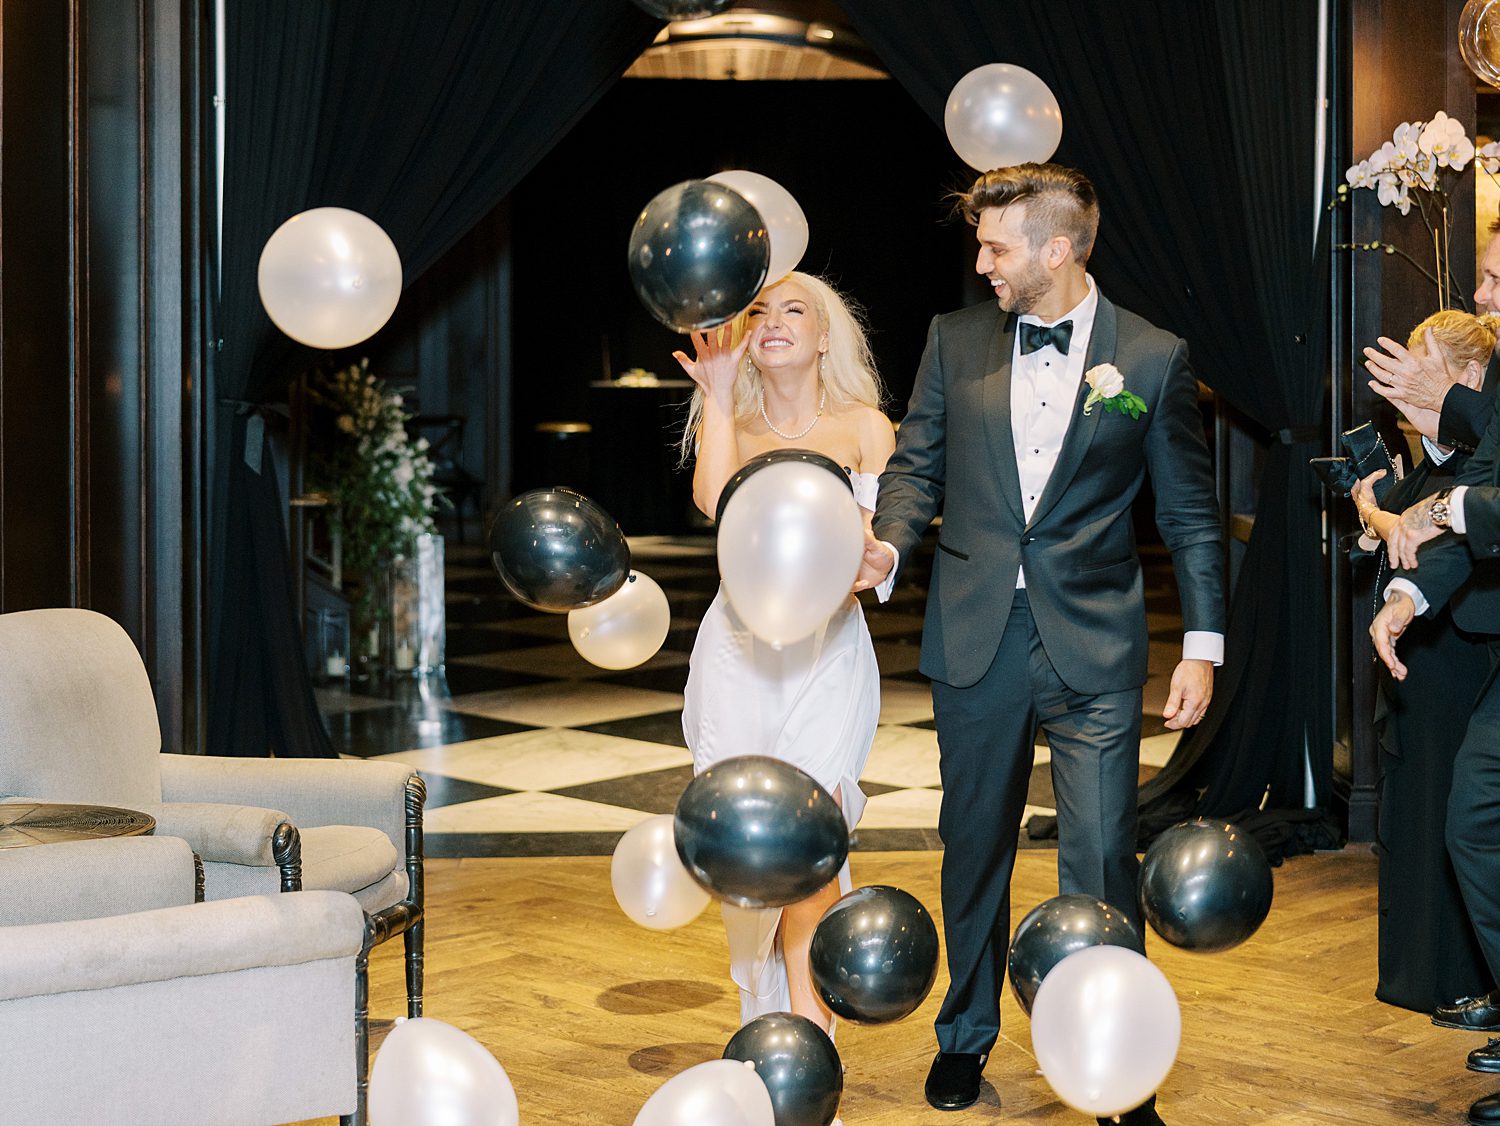 black and white balloons fall over bride and groom at the Oxford Exchange